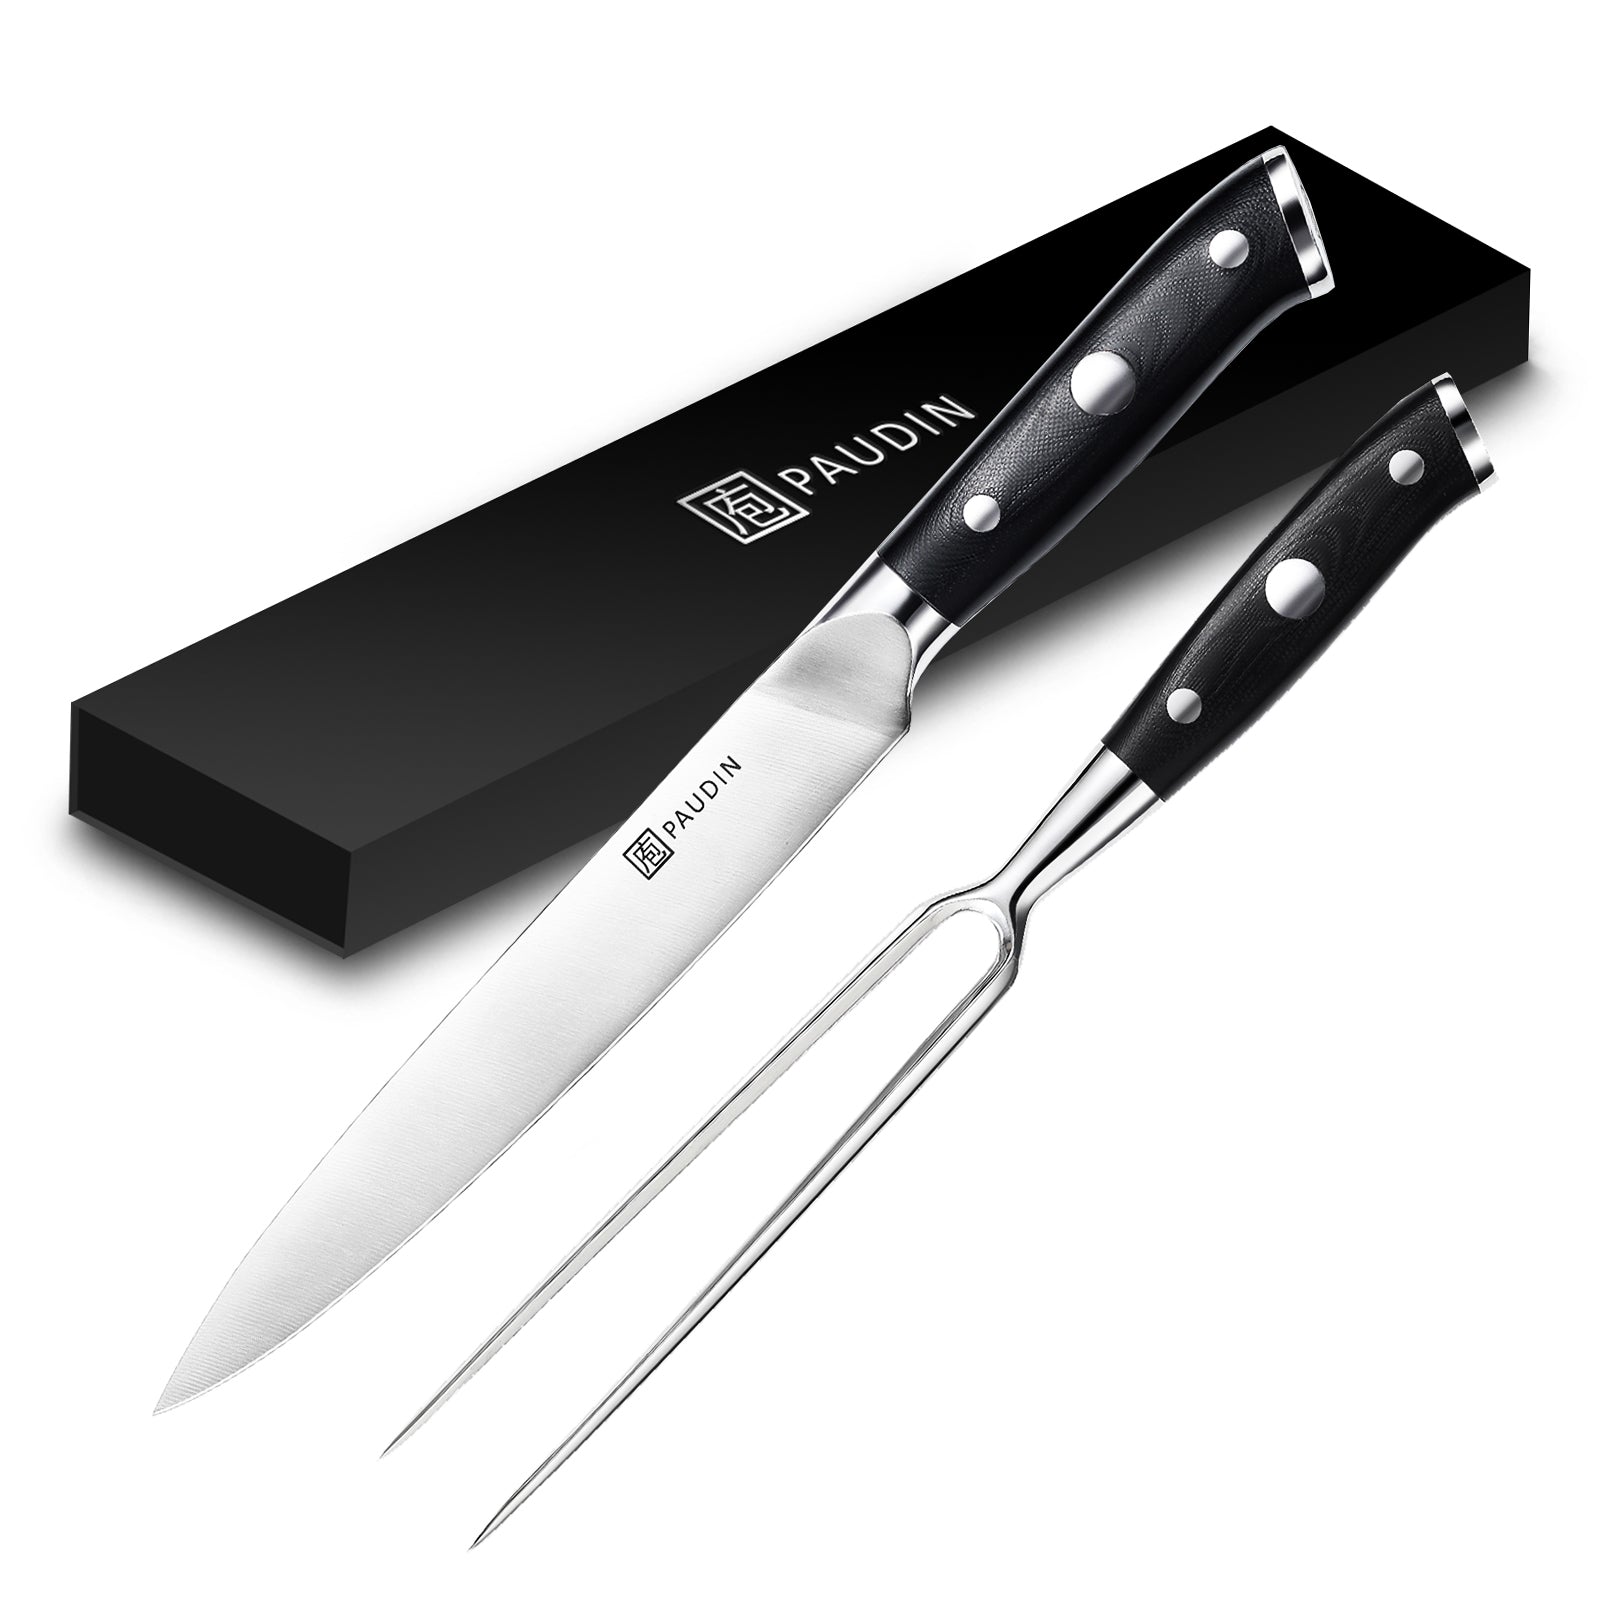 2PCs Set Pointed Carving Knife & Carving fork, 8 Inch | Black ABS Handle